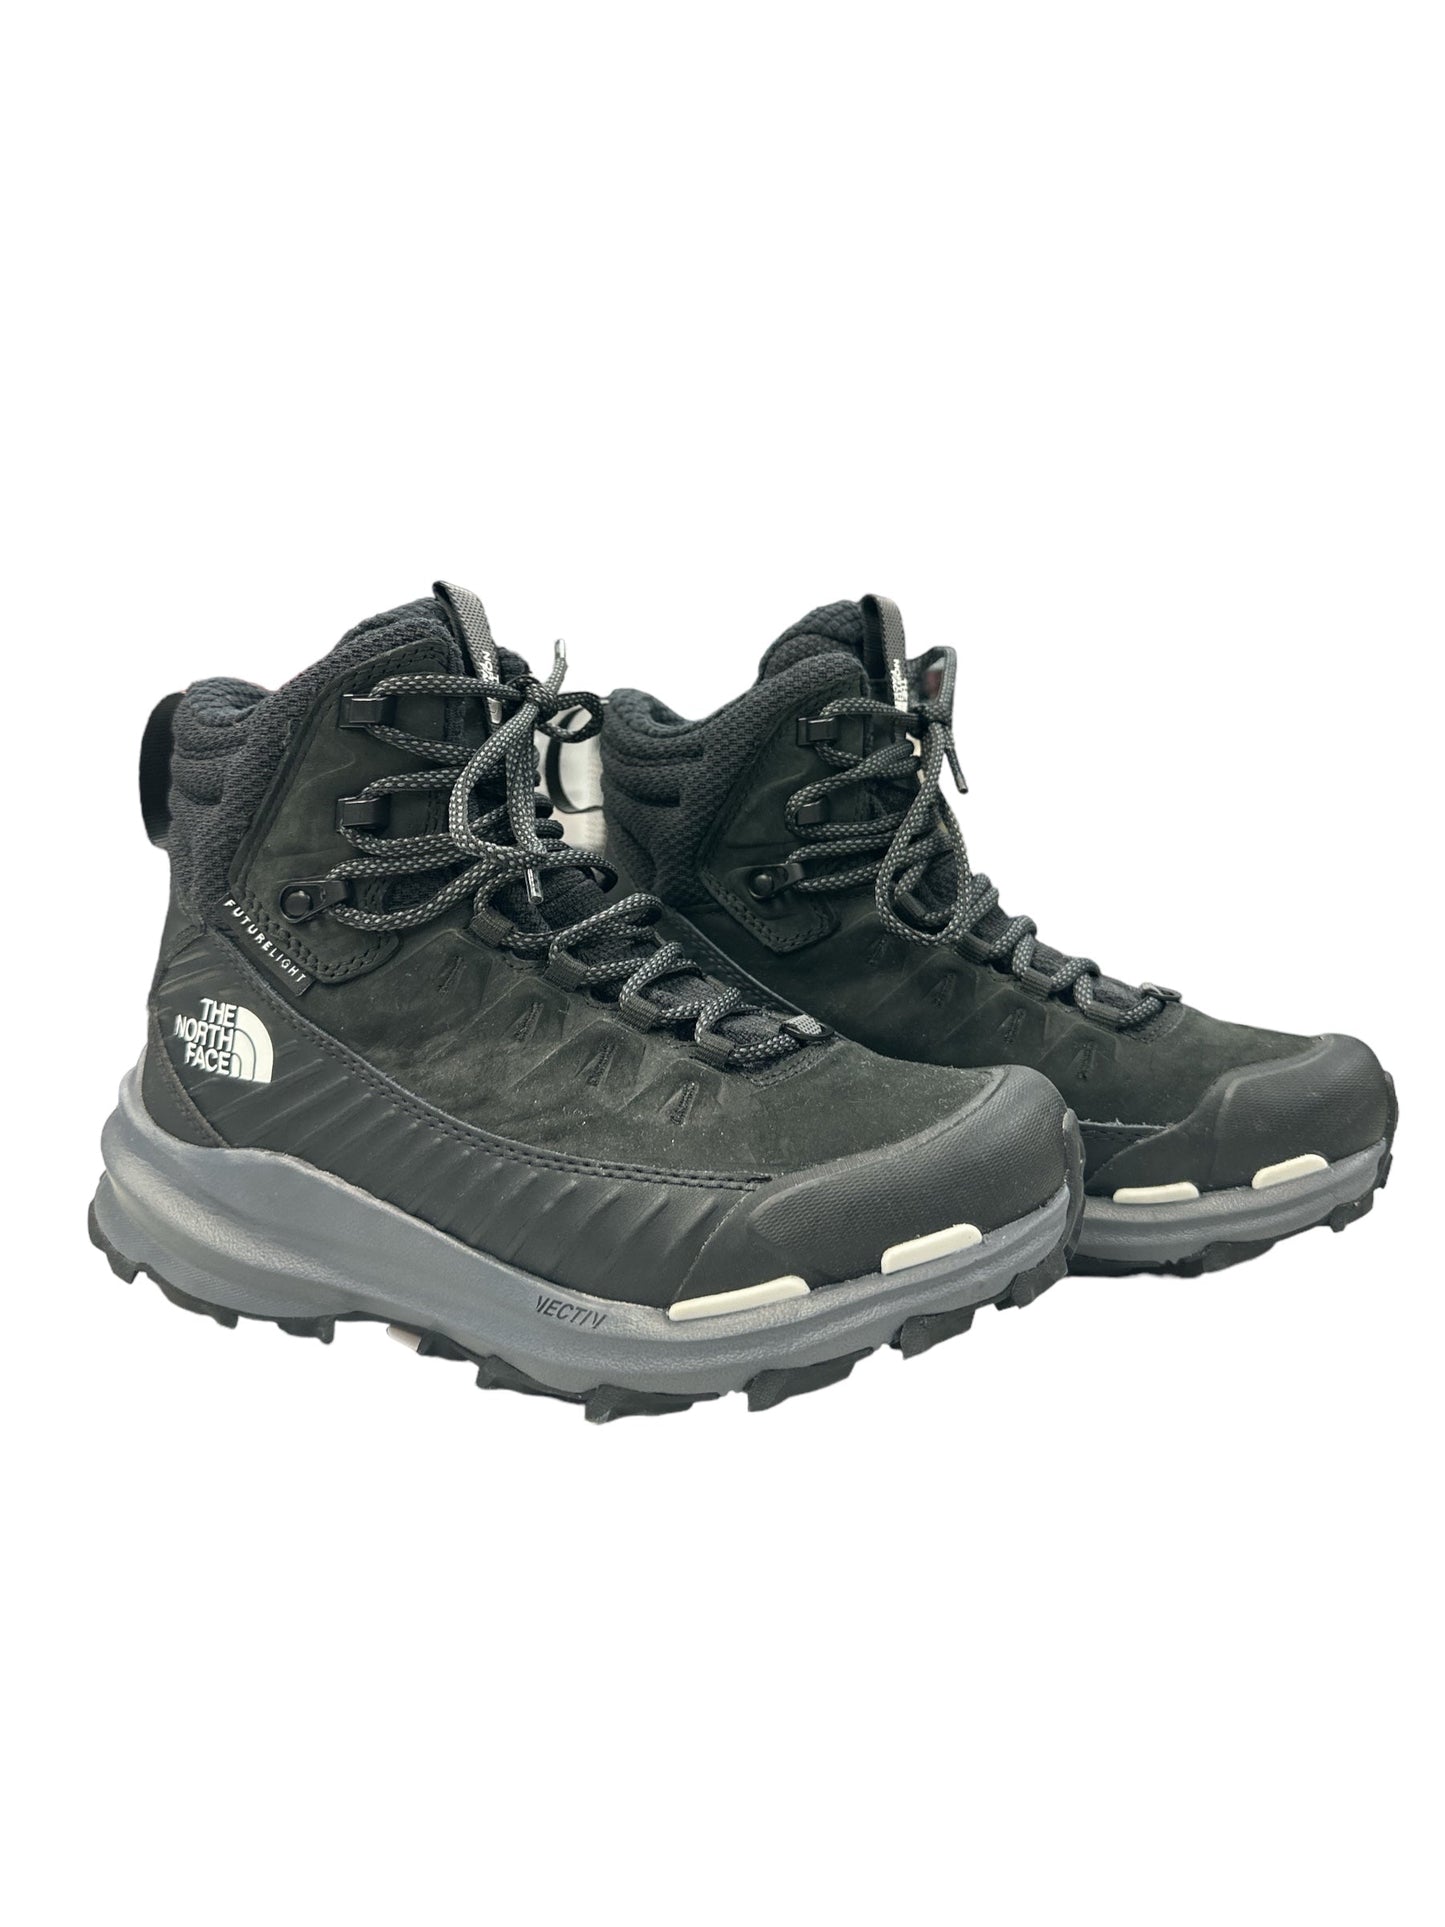 Black Boots Hiking The North Face, Size 7.5